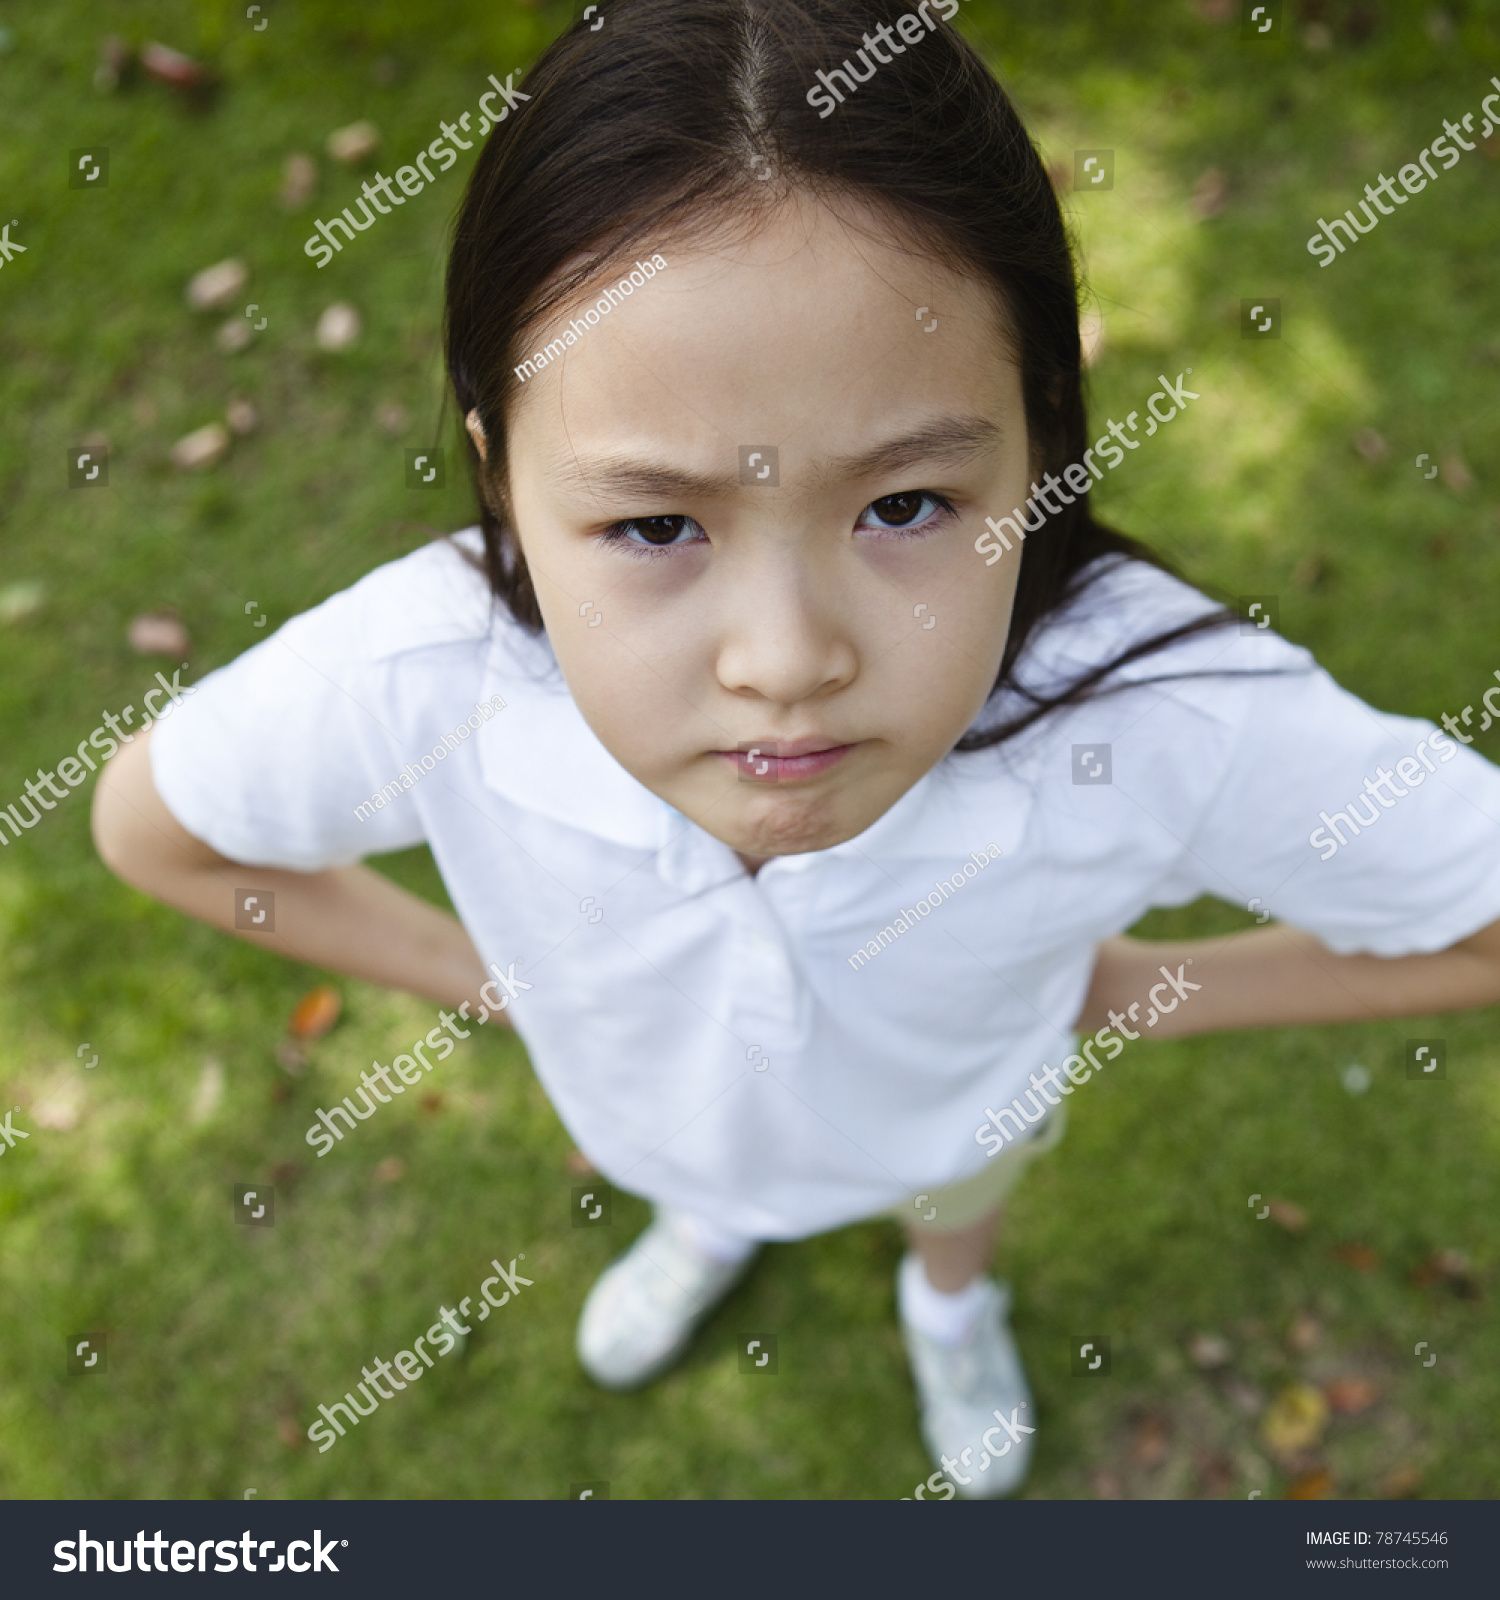 Wide-Angle-Lens Portrait Of A Little Asian Girl Stock Photo 78745546 ...